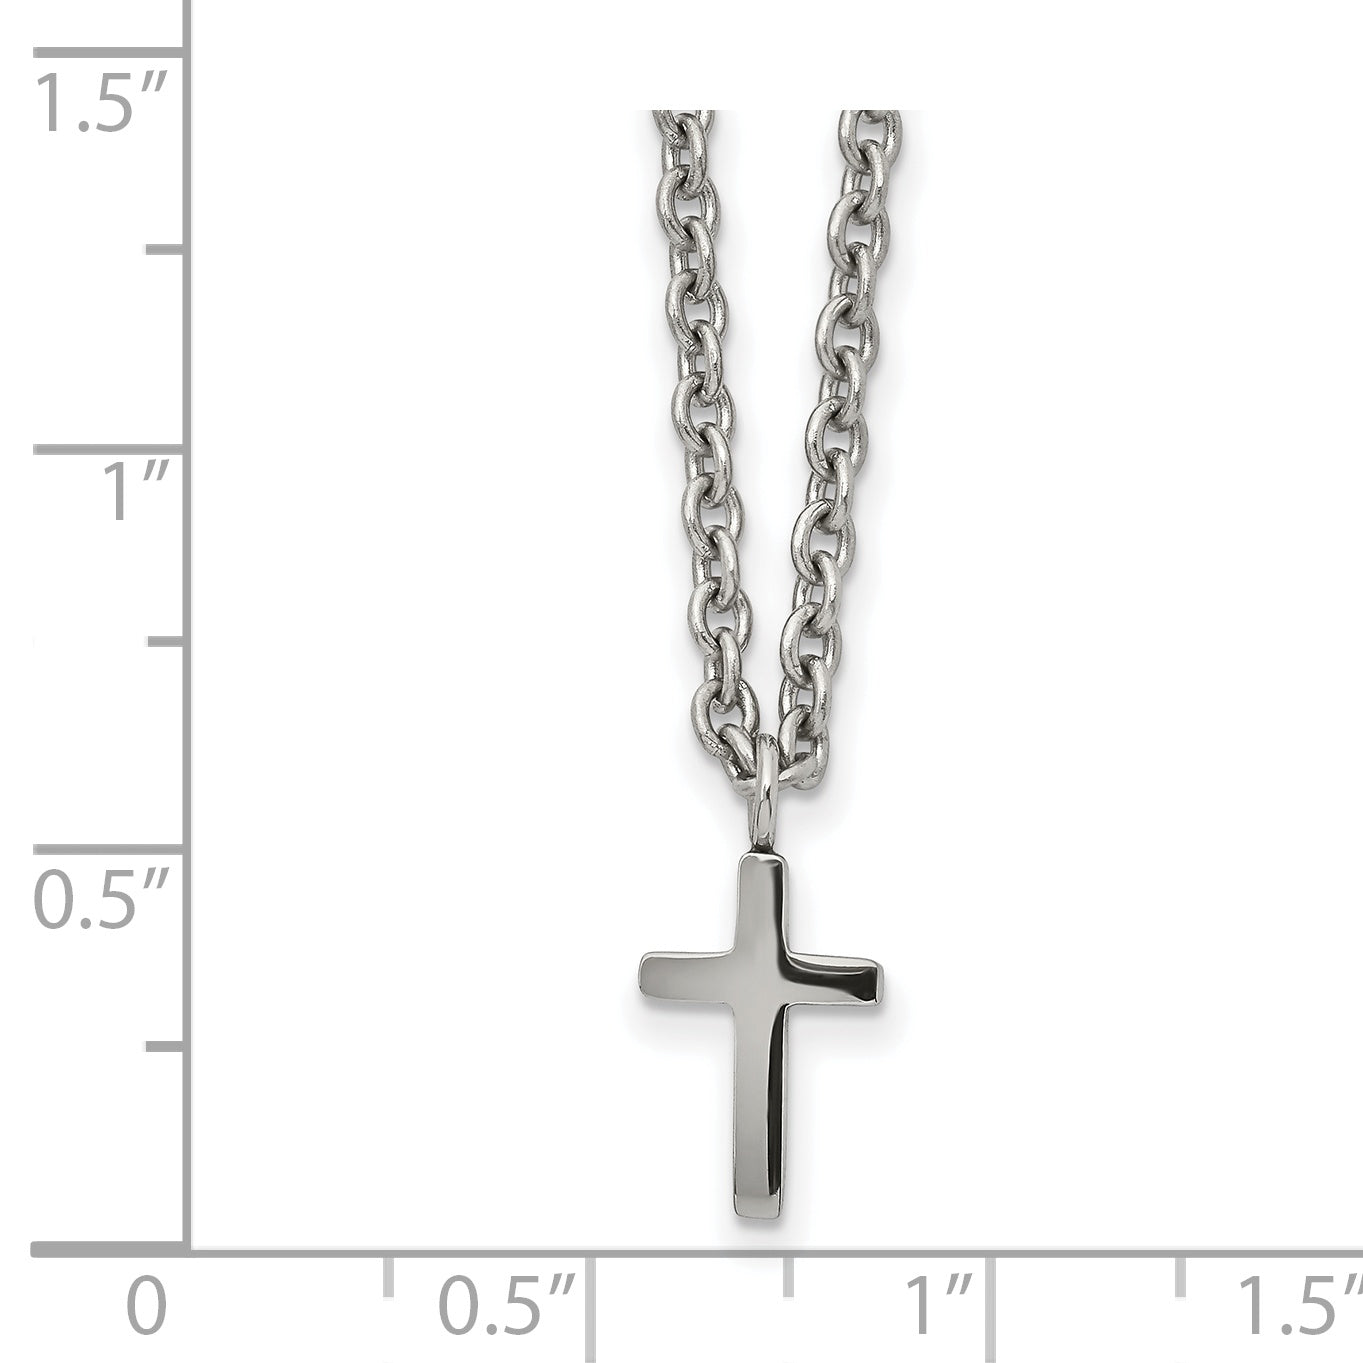 Chisel Stainless Steel Polished 11mm Cross Pendant on an 18 inch Cable Chain Necklace